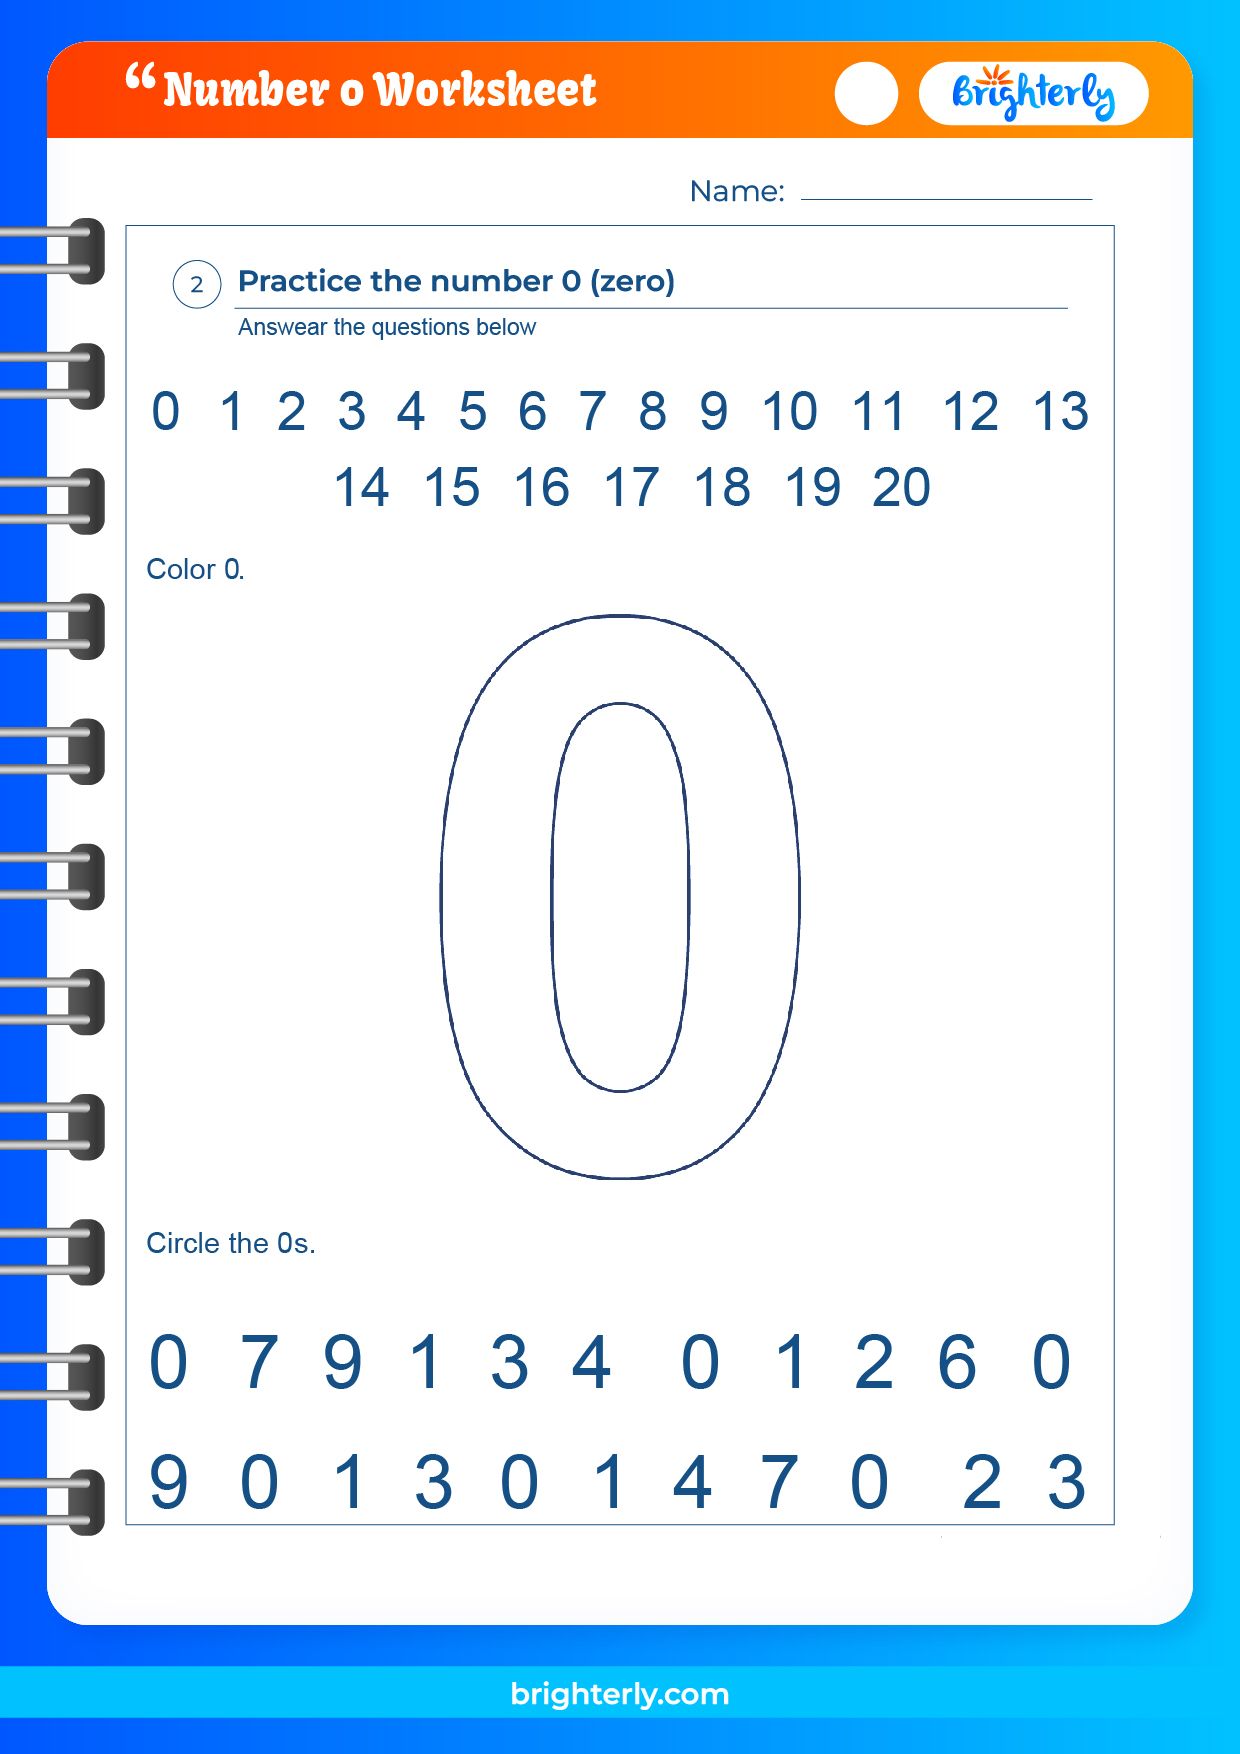 free-printable-number-0-zero-worksheets-for-kids-pdfs